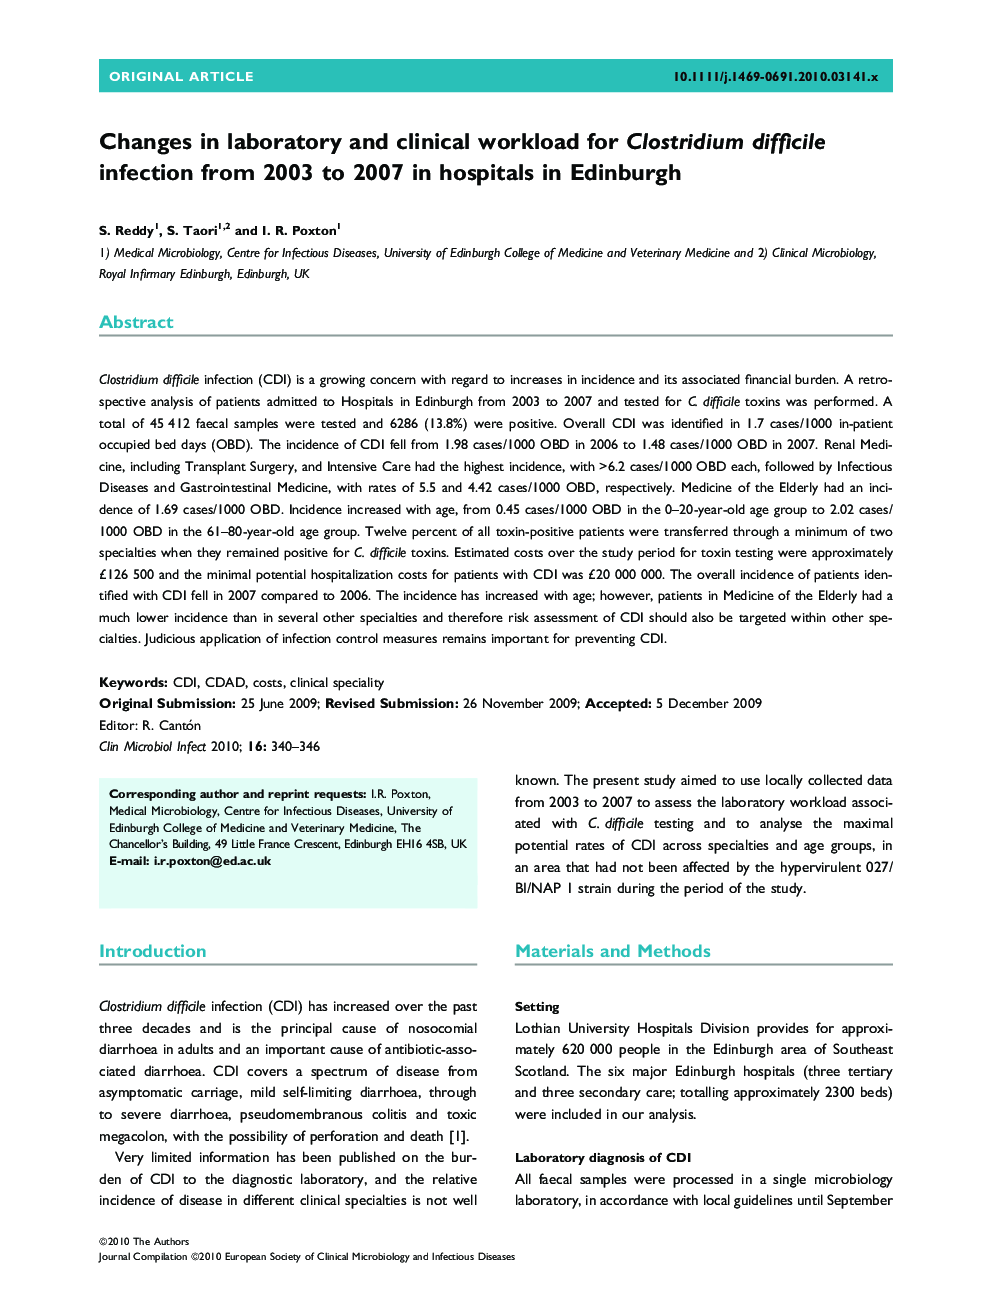 Changes in laboratory and clinical workload for Clostridium difficile infection from 2003 to 2007 in hospitals in Edinburgh 